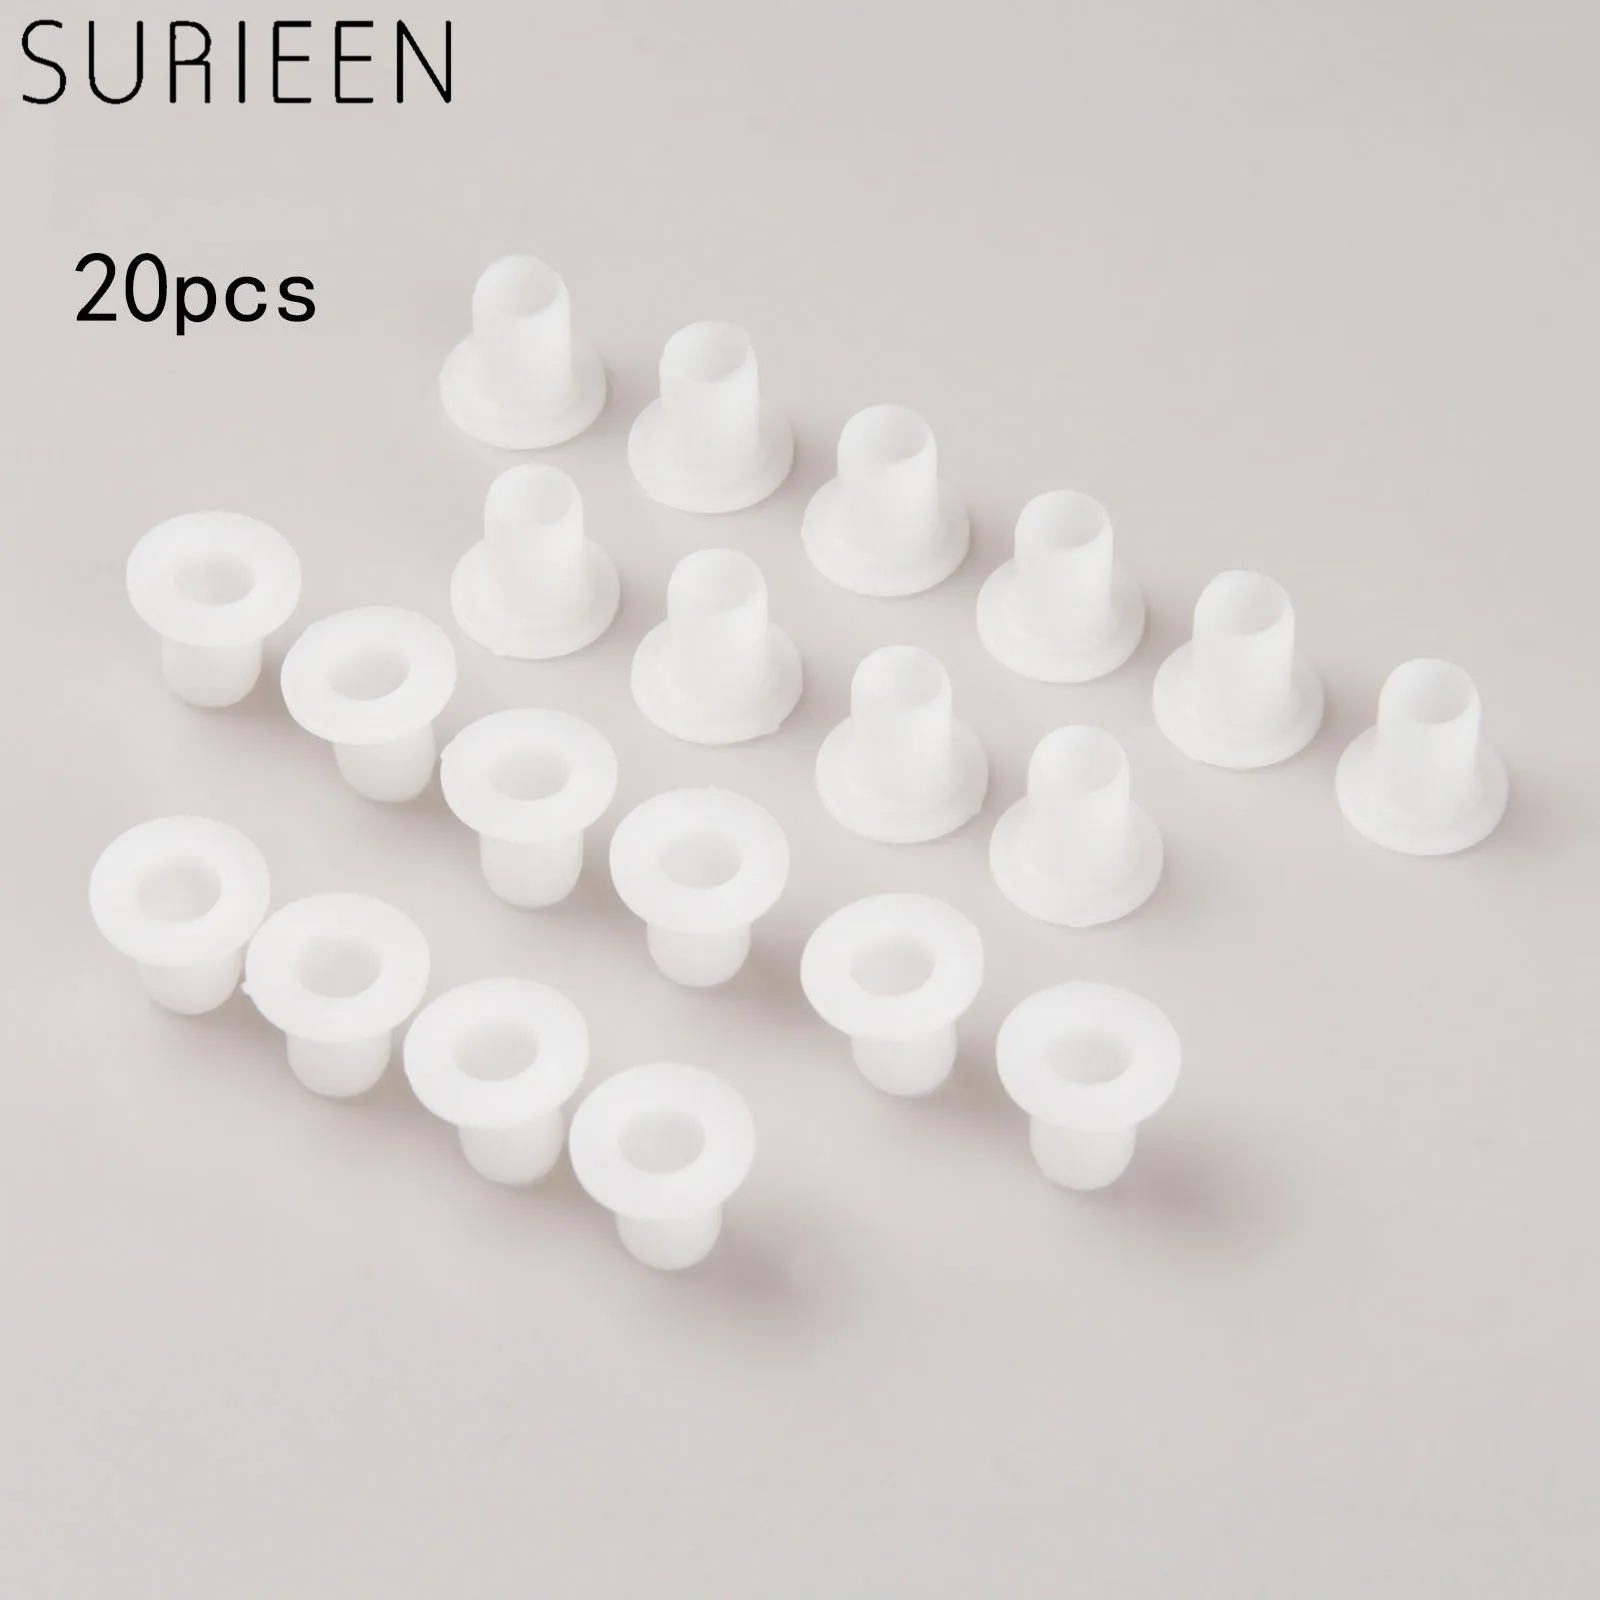 

20pcs/lot Kids Roller Skate Shoes Center Bearing Bushing Spacers Side Plug Wheels Accessories Plastic Dia Inner 6mm X Outer 8mm